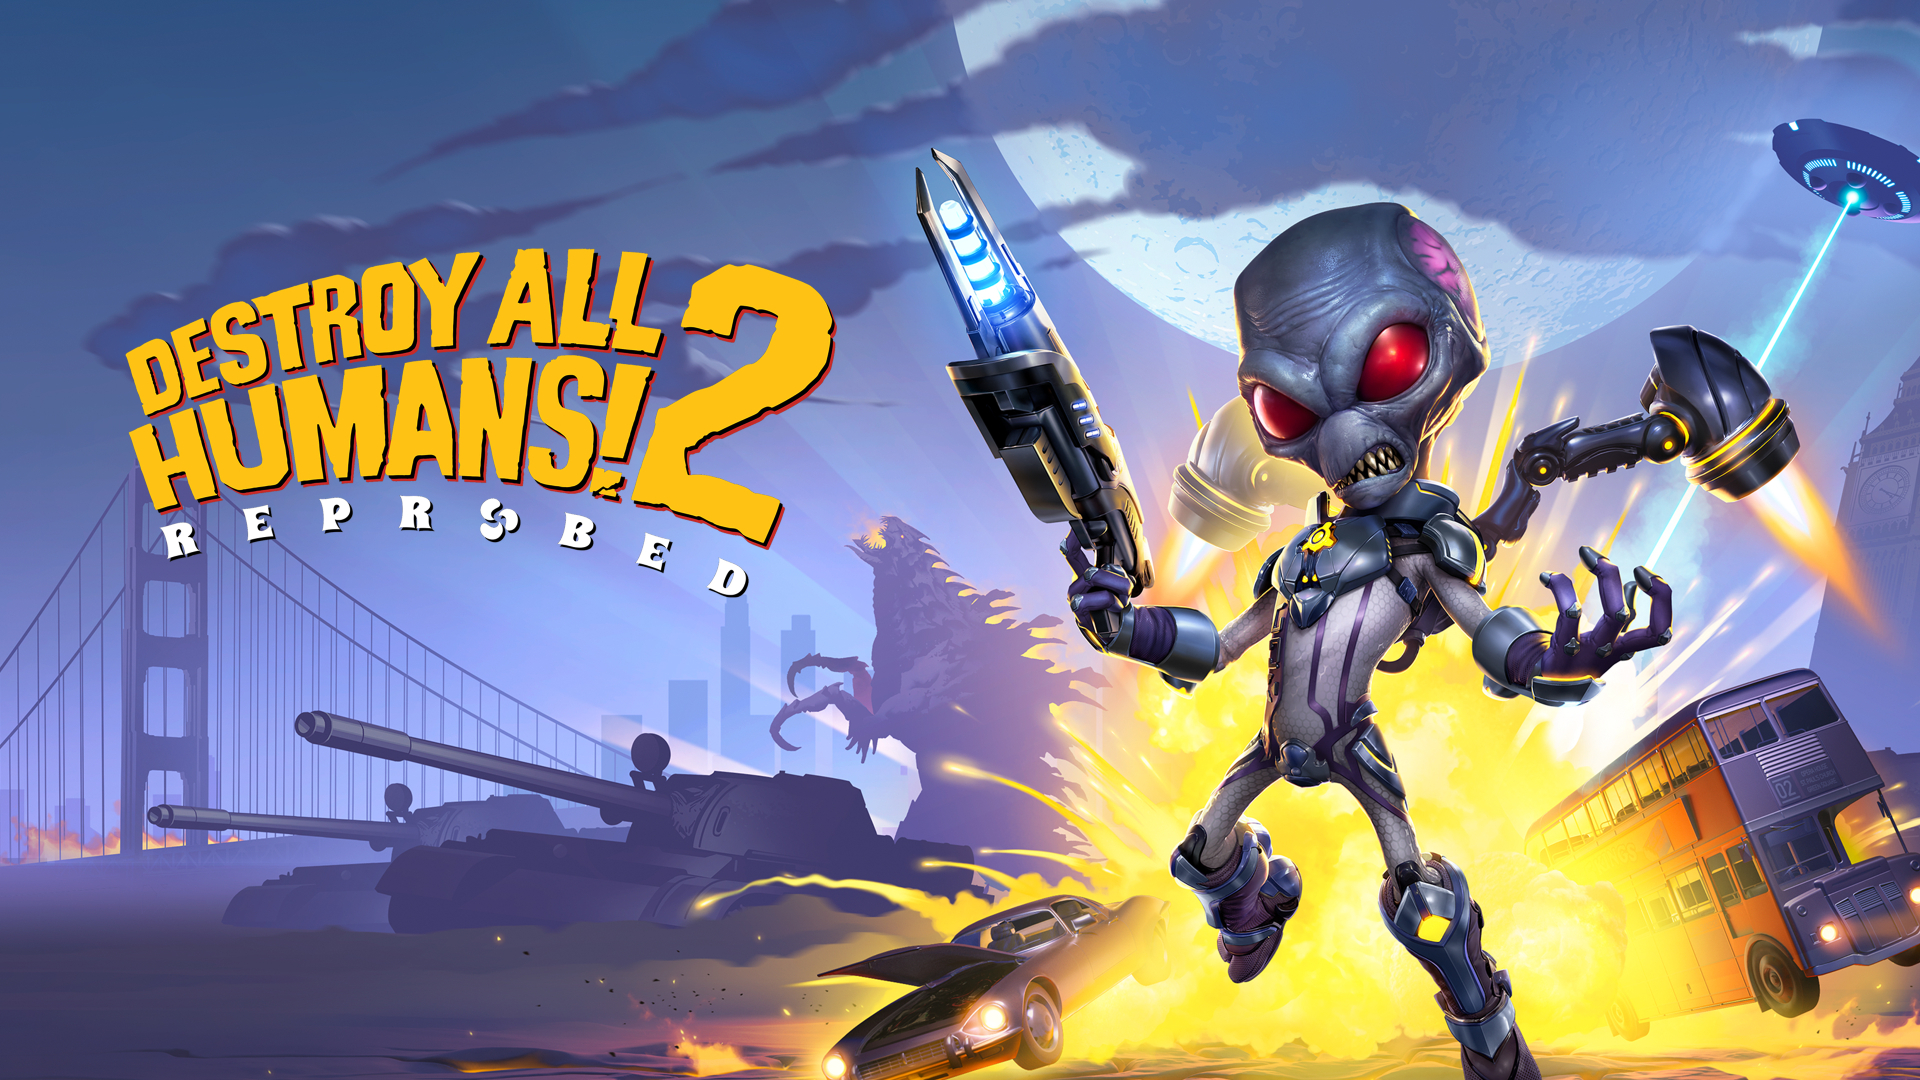 Destroy All Humans! 2 - Reprobed - Official Game Site